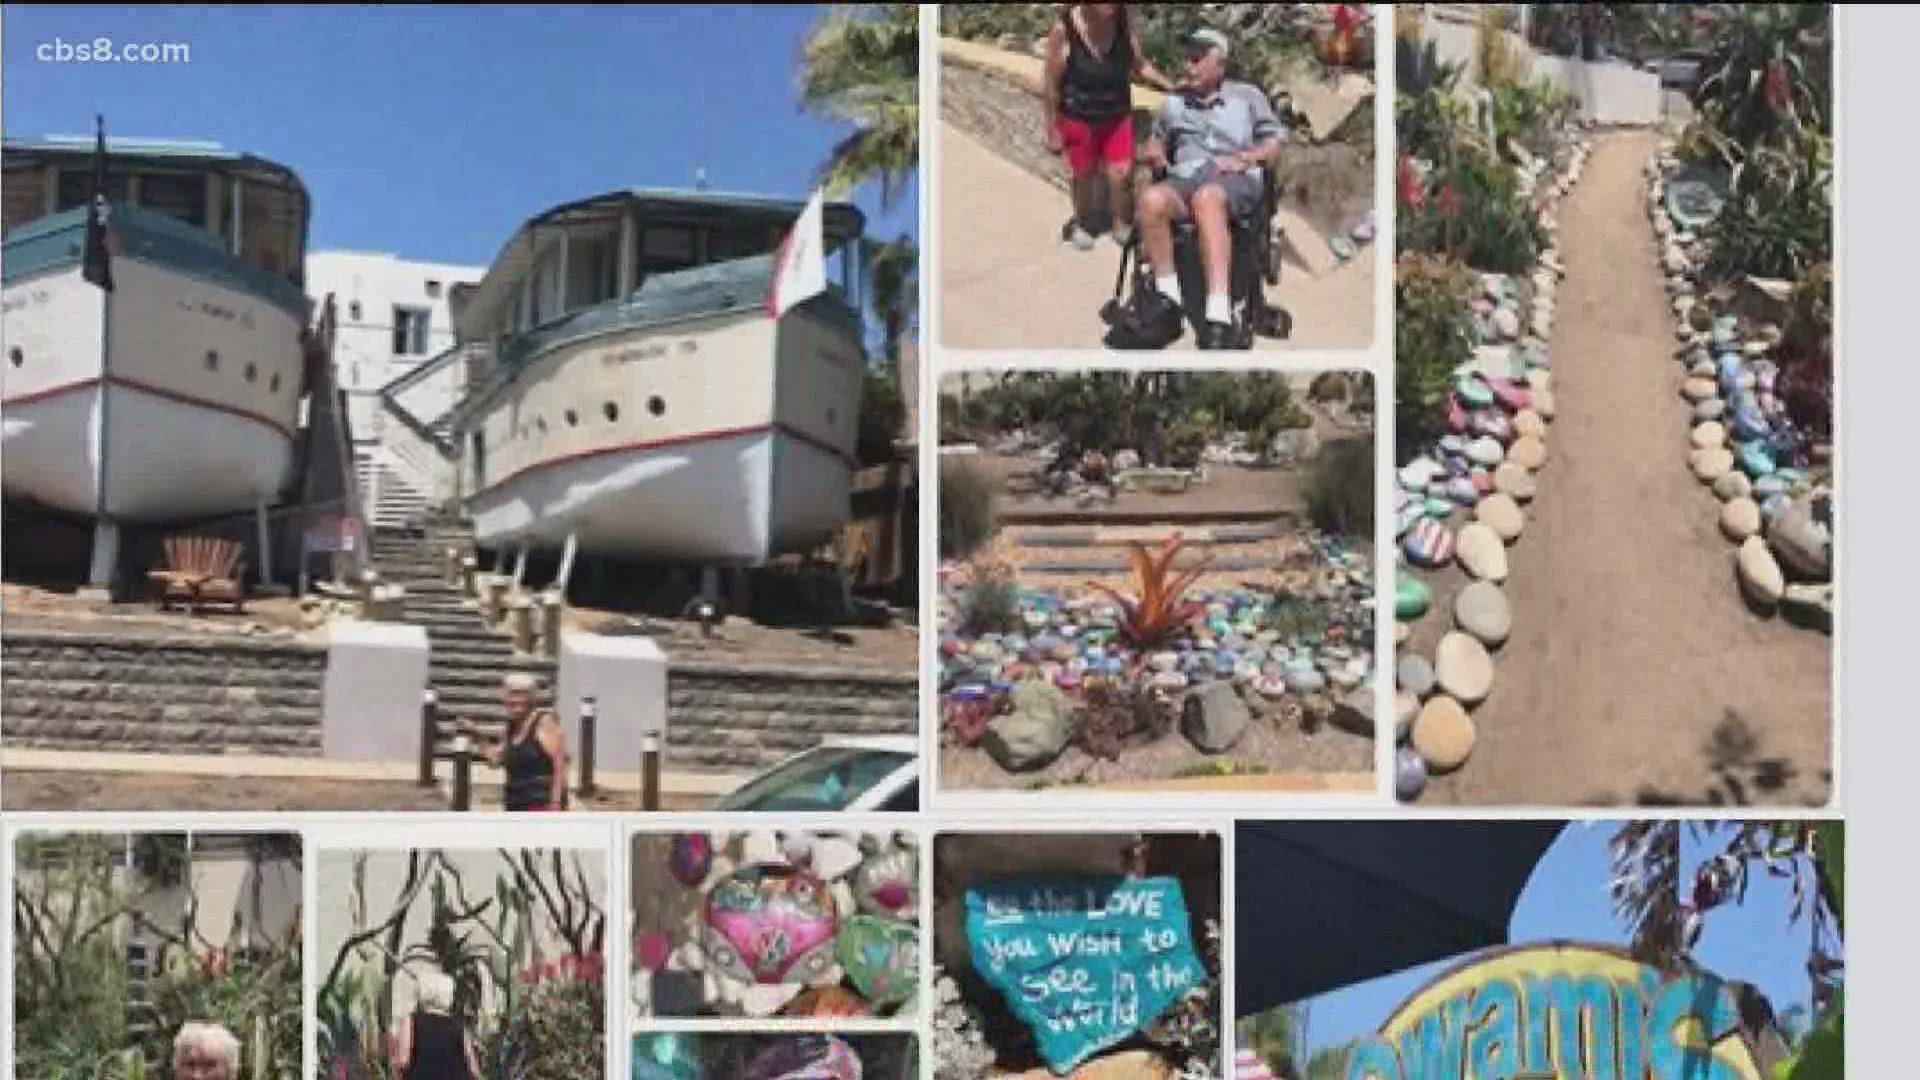 Locals have been getting creative and taking advantage of all that San Diego has to offer.